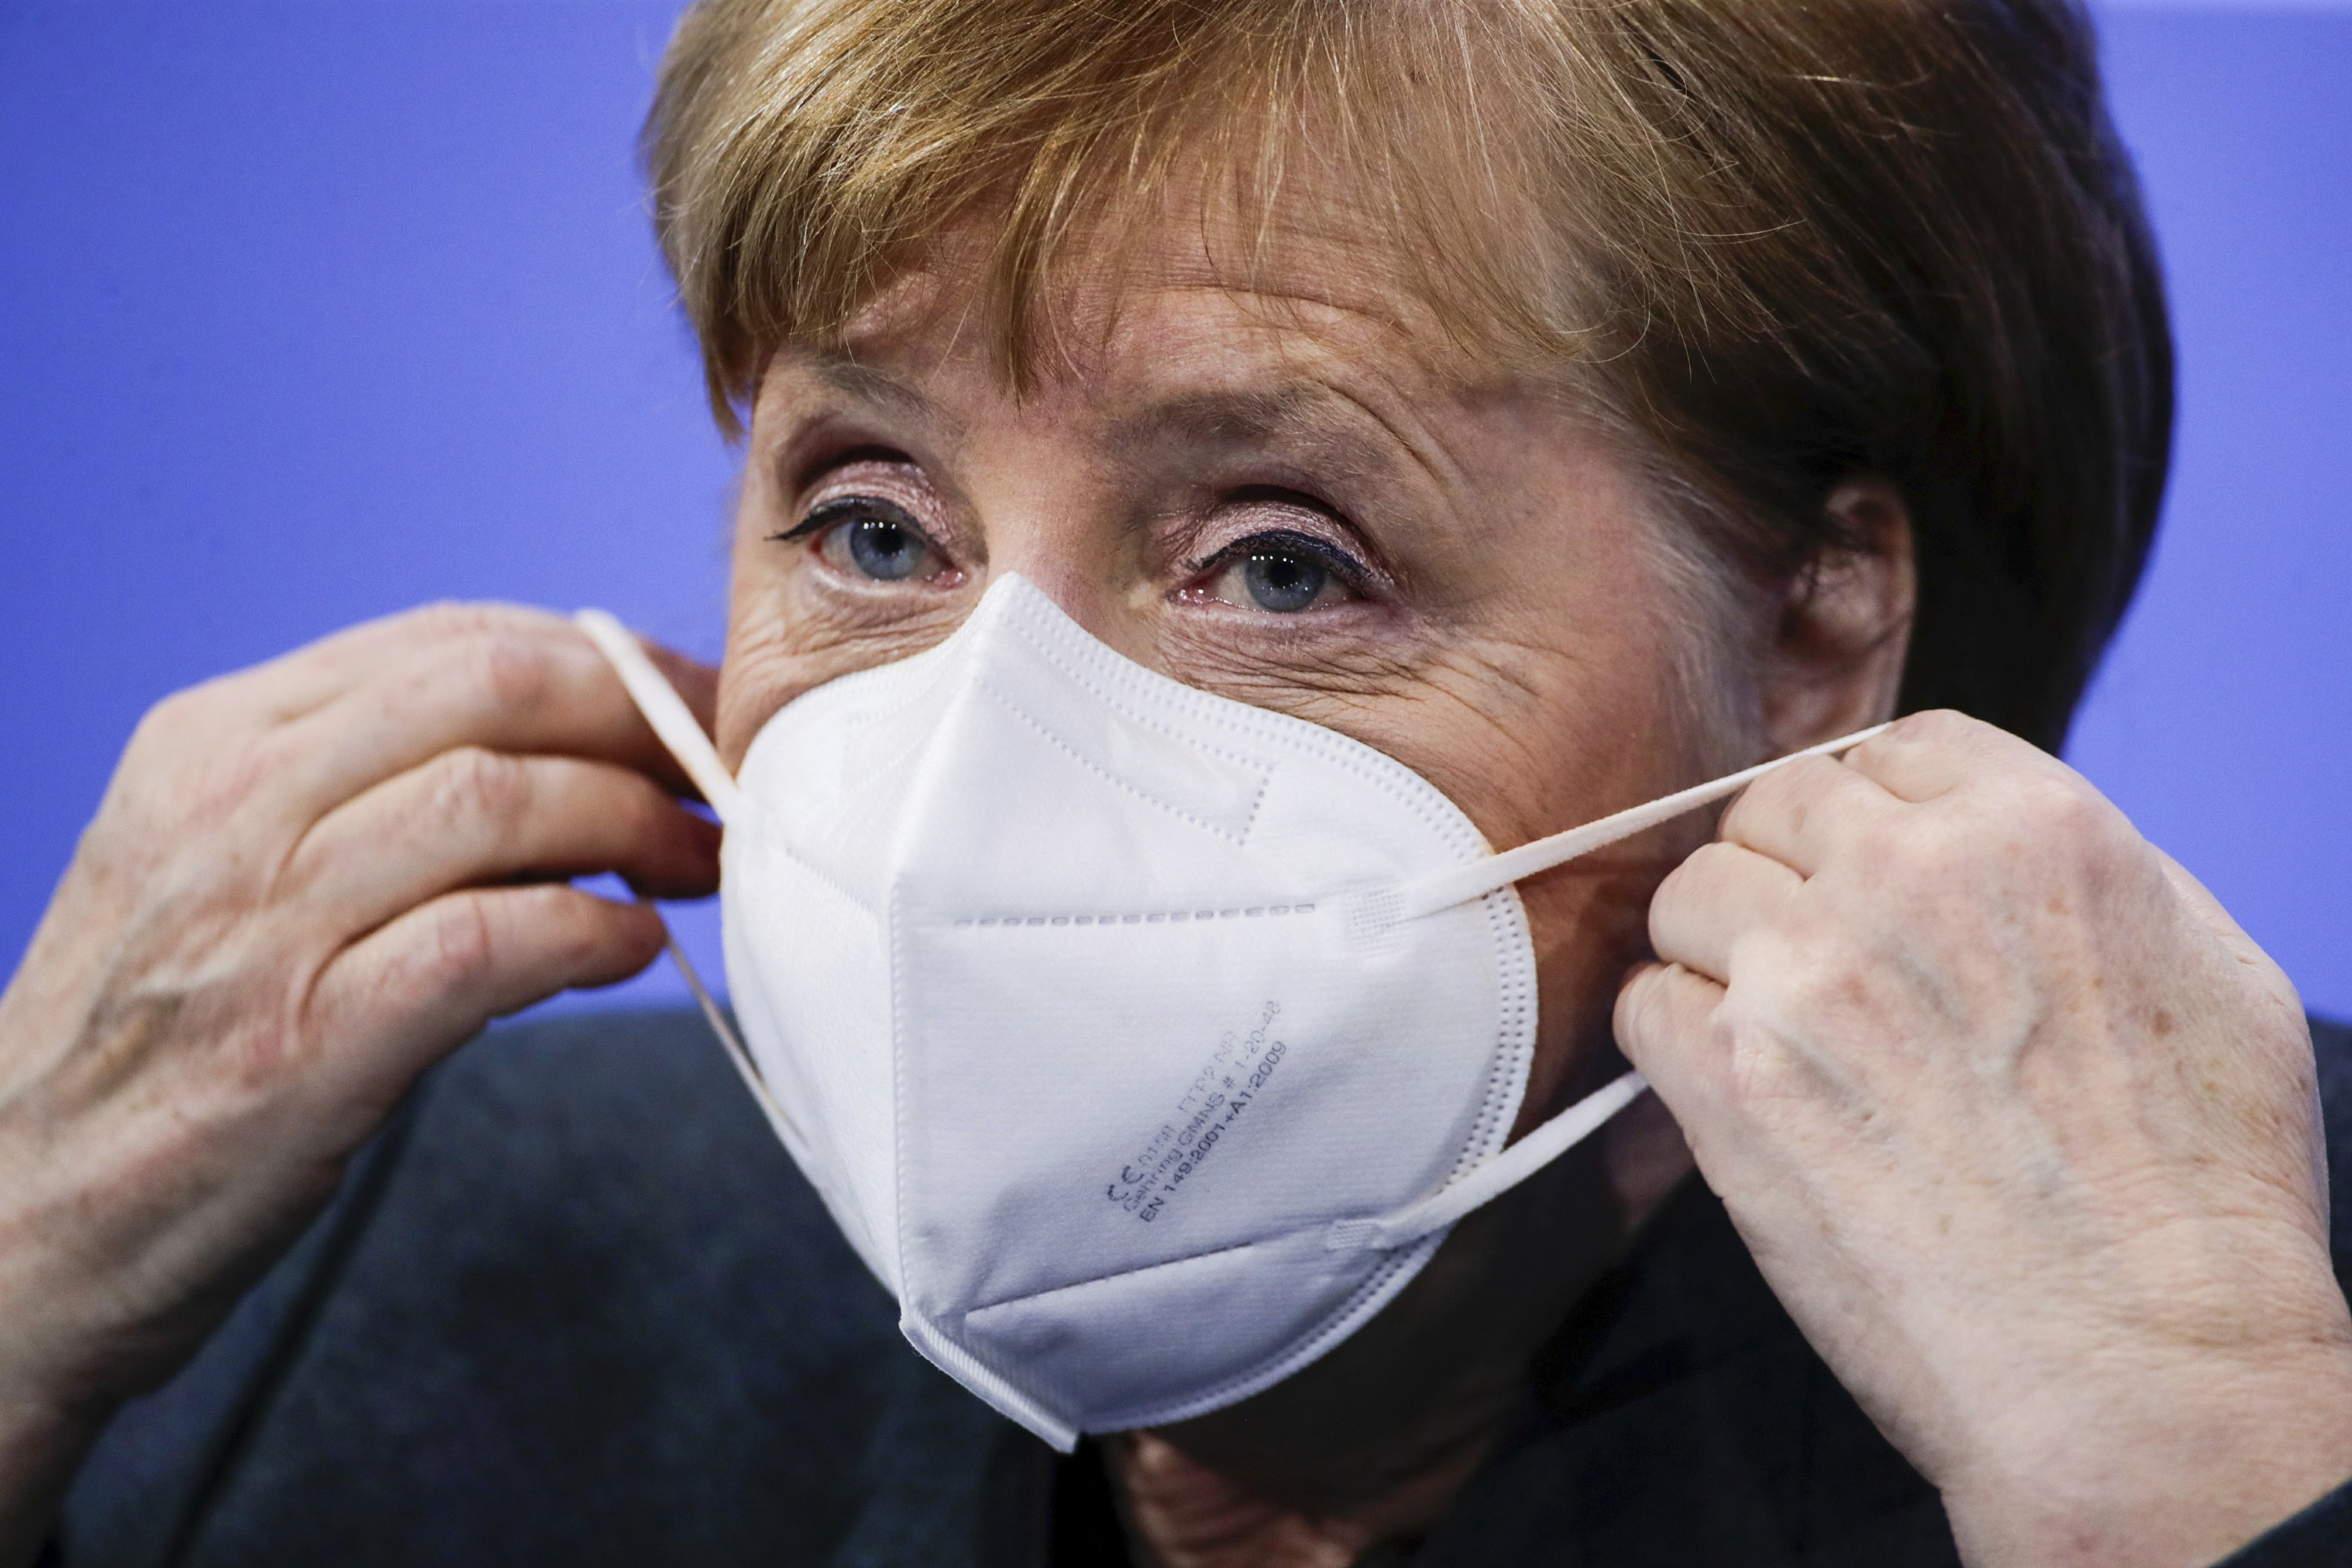 Germany will extend the virus shutdown until mid-February